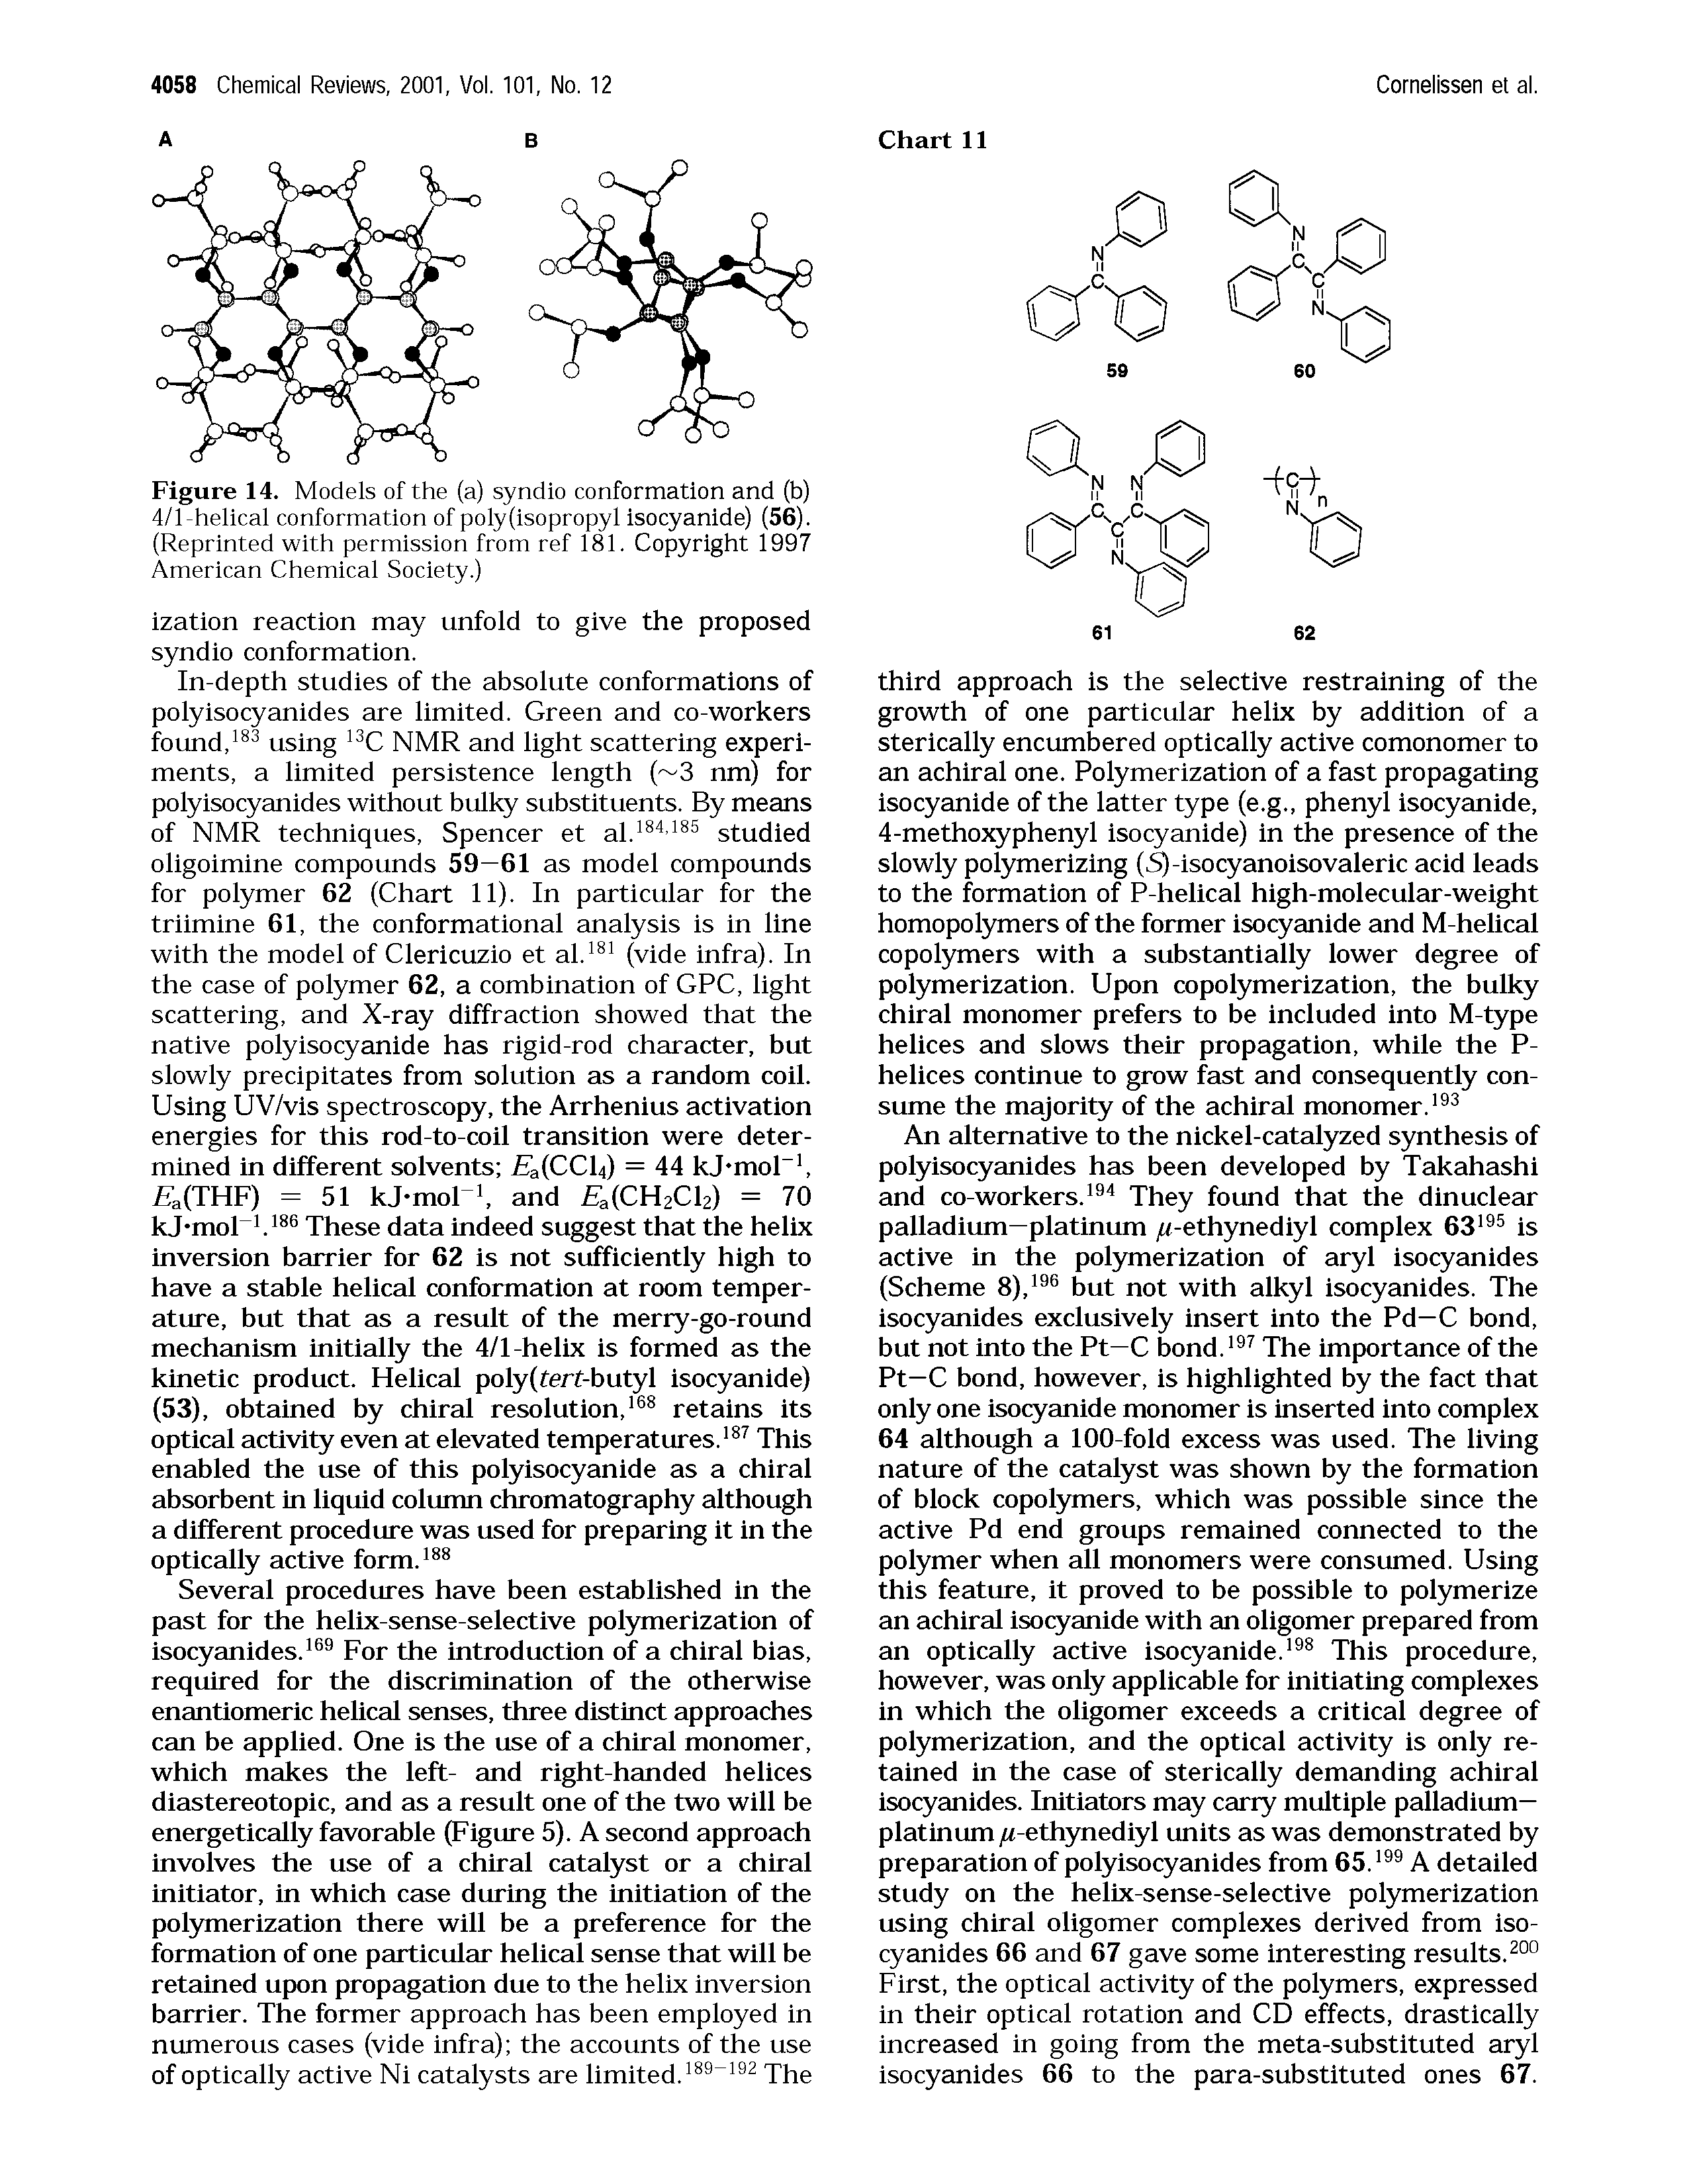 Figure 14. Models of the (a) syndio conformation and (b) 4/1-helical conformation of poly(isopropyl isocyanide) (56). (Reprinted with permission from ref 181. Copyright 1997 American Chemical Society.)...